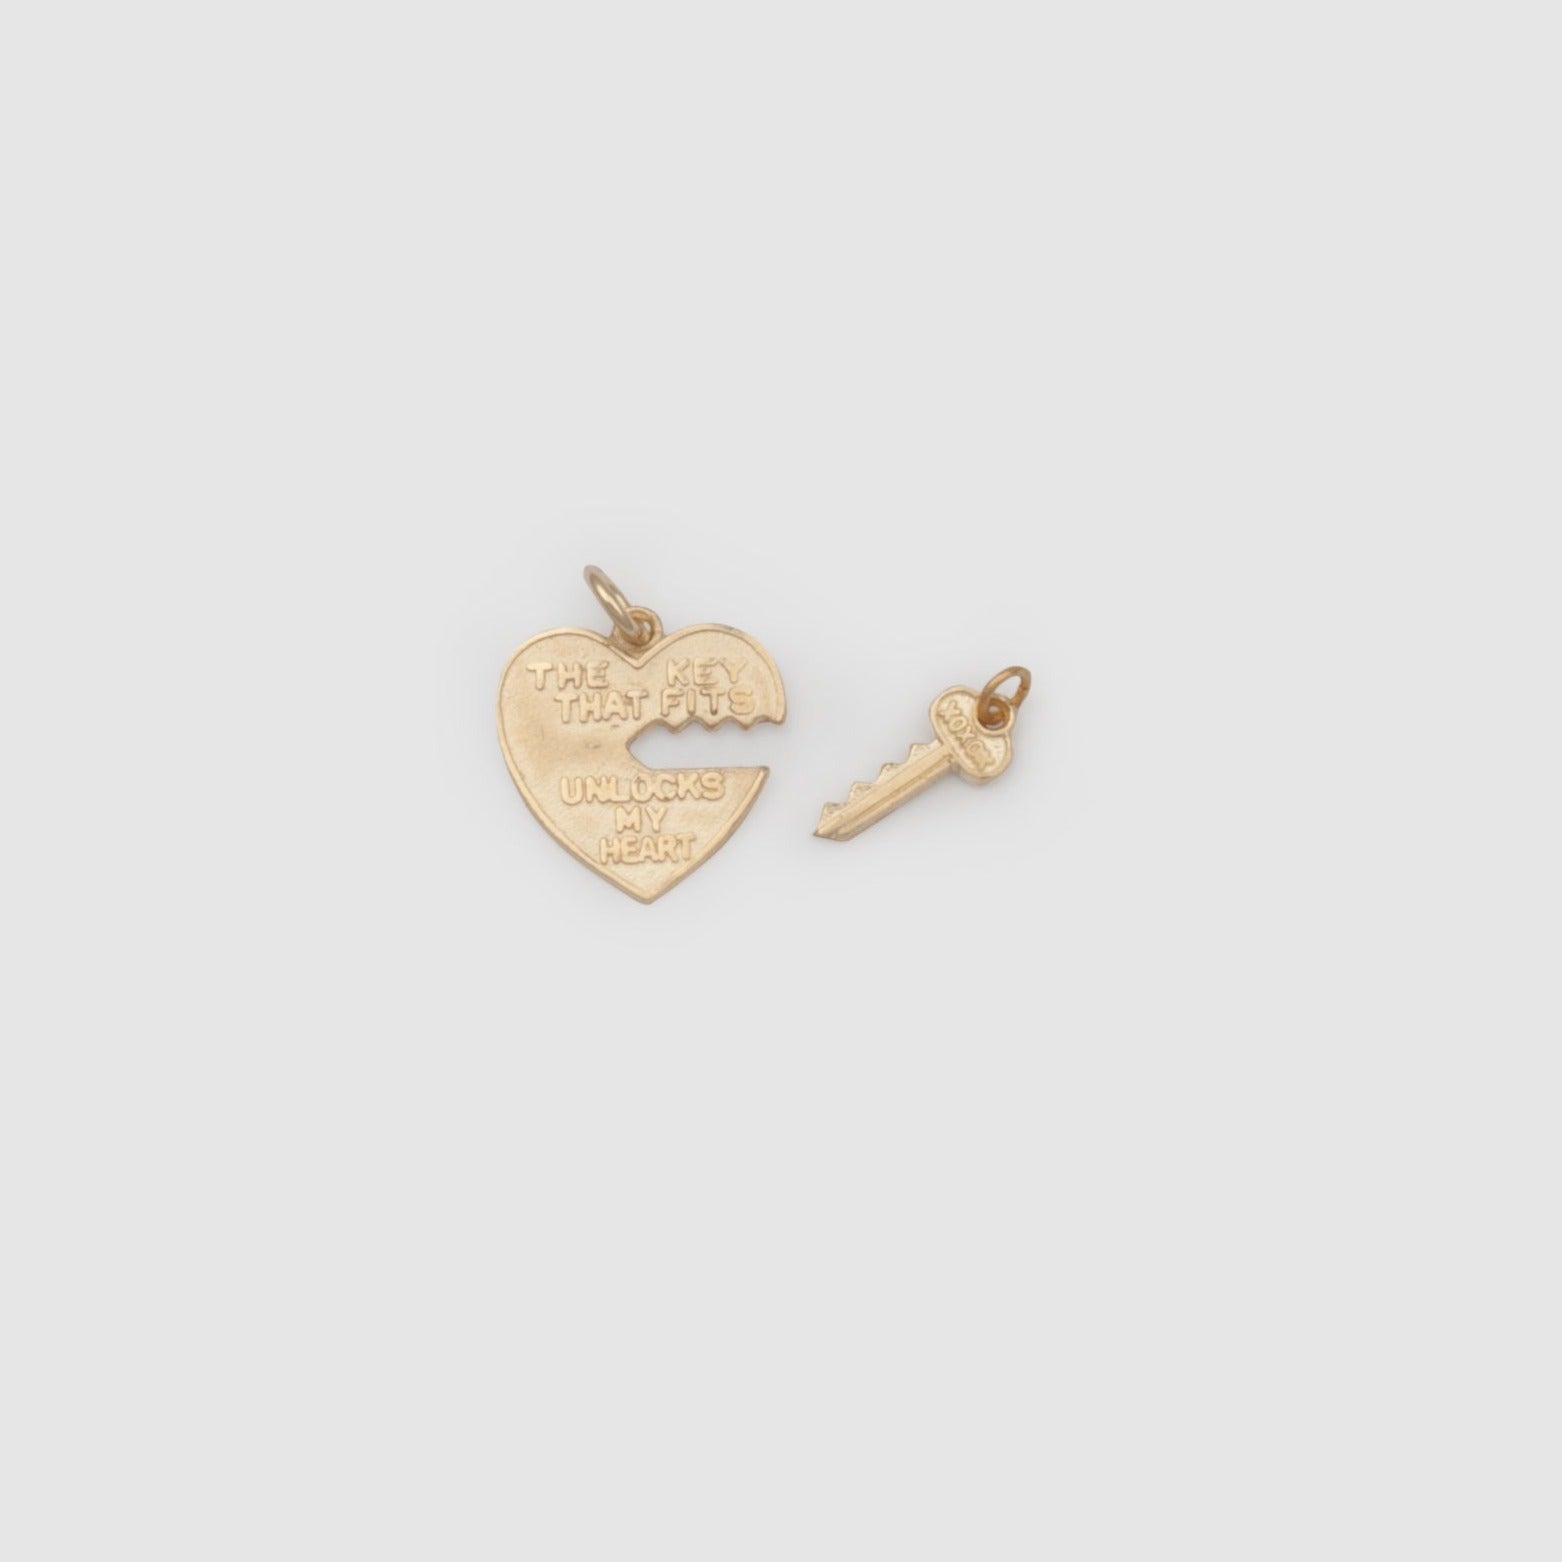 10k solid yellow gold heart and key pendants